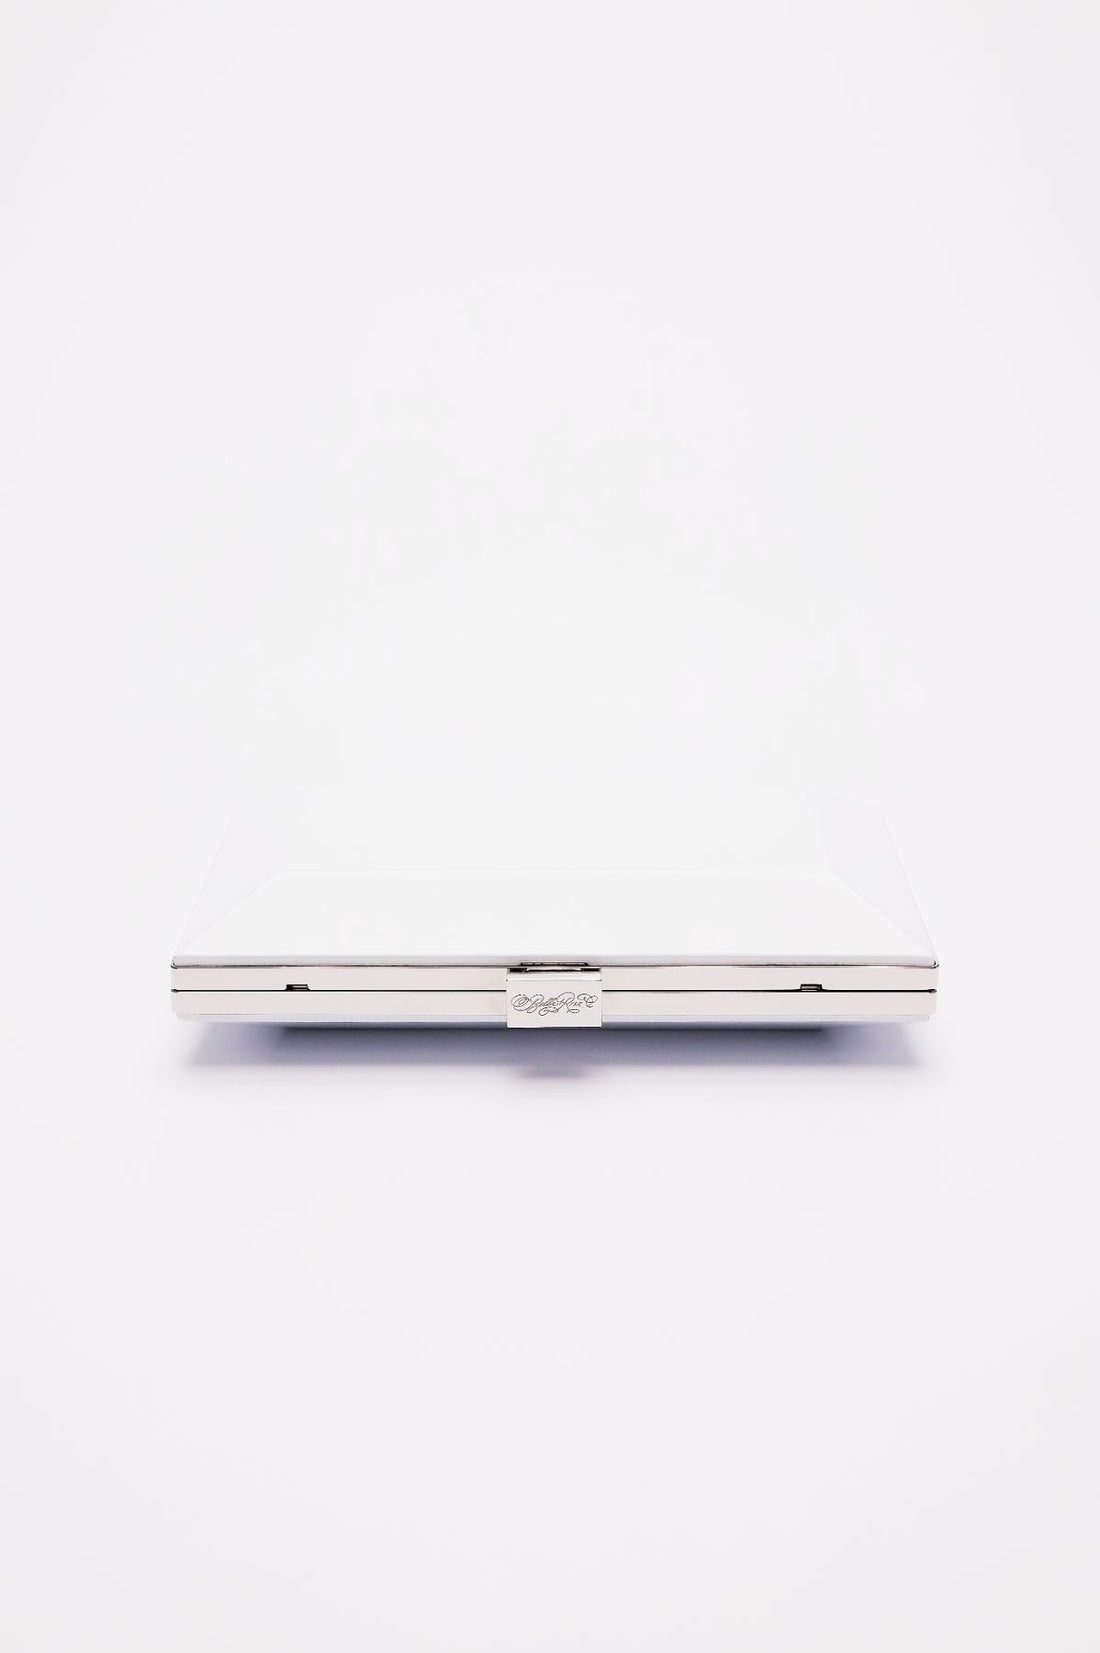 Top closed view of Milan Clutch in pearl white with silver hardware frame.